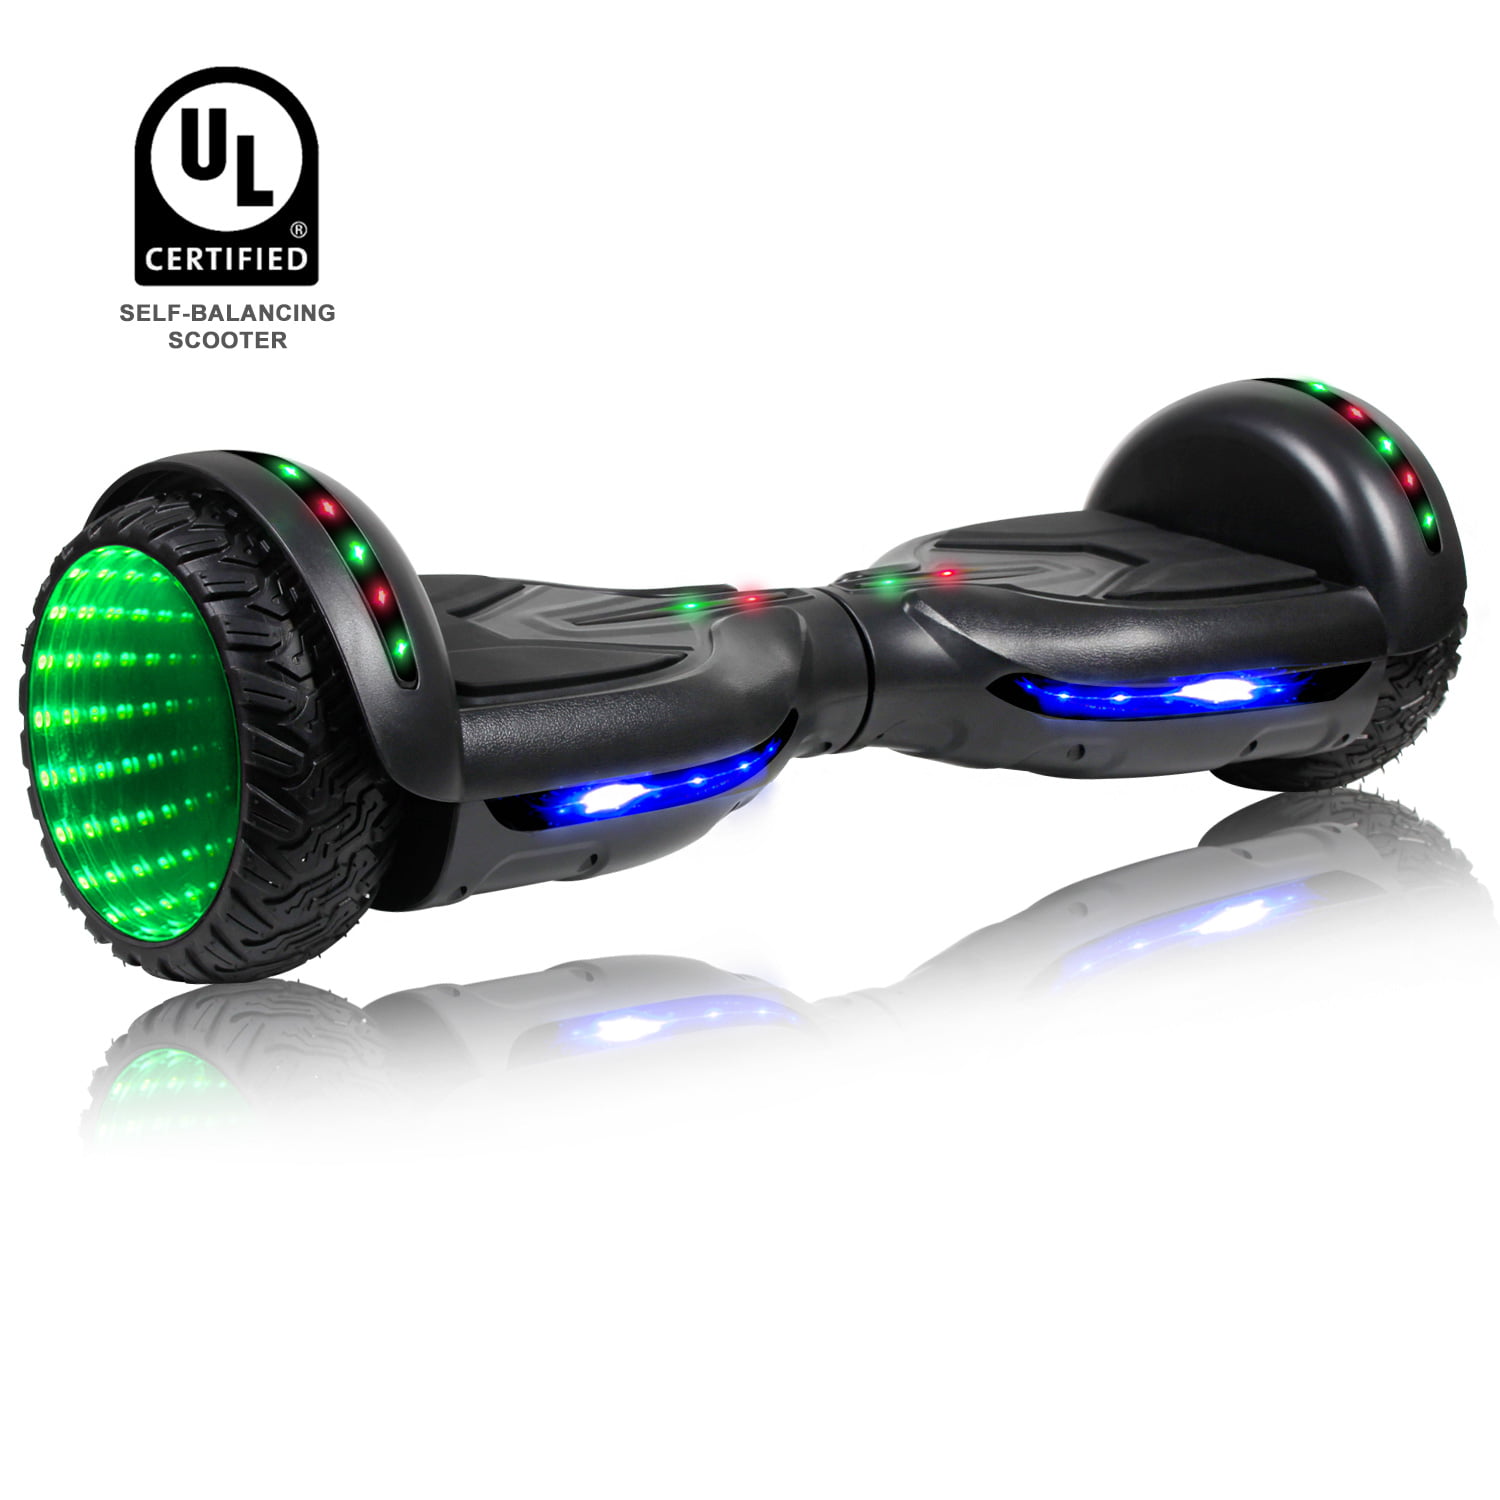 6.5" BLUETOOTH HOVER BOARD SELF BALANCING SCOOTER ELECTRIC WITH BAG REMOTE KEY 